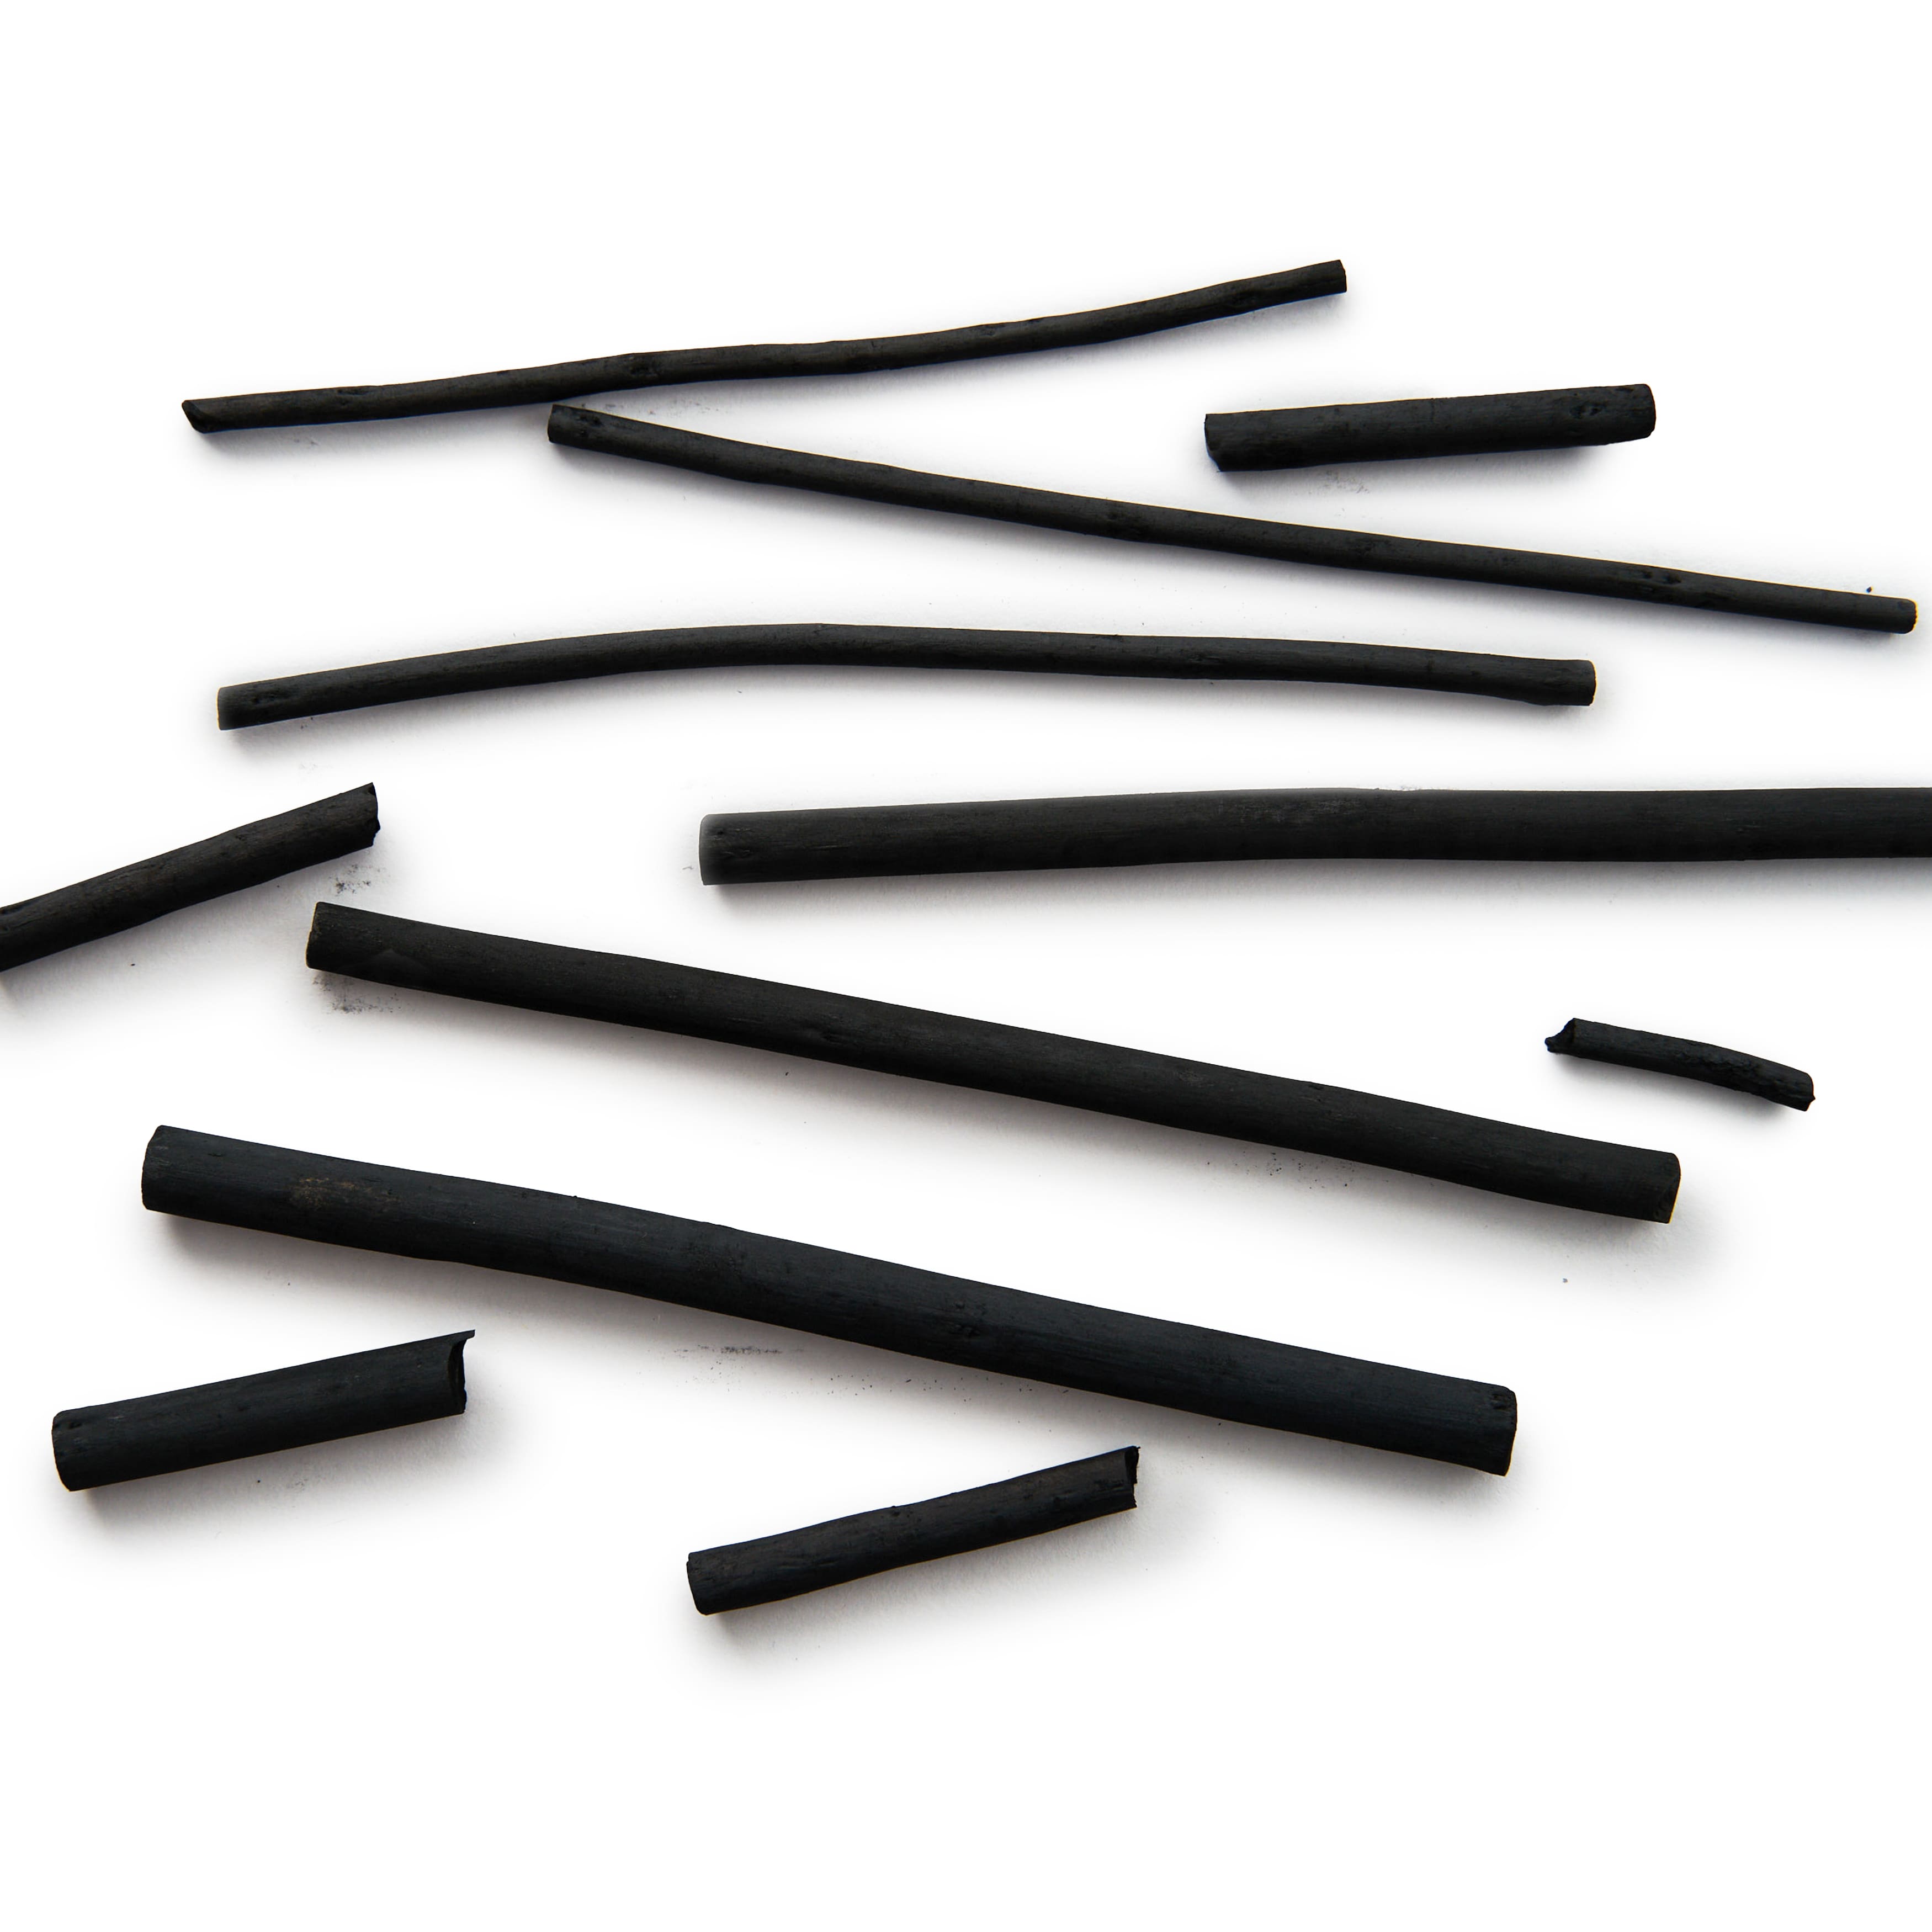 Assorted Soft Willow Charcoal Sticks, Hobby Lobby